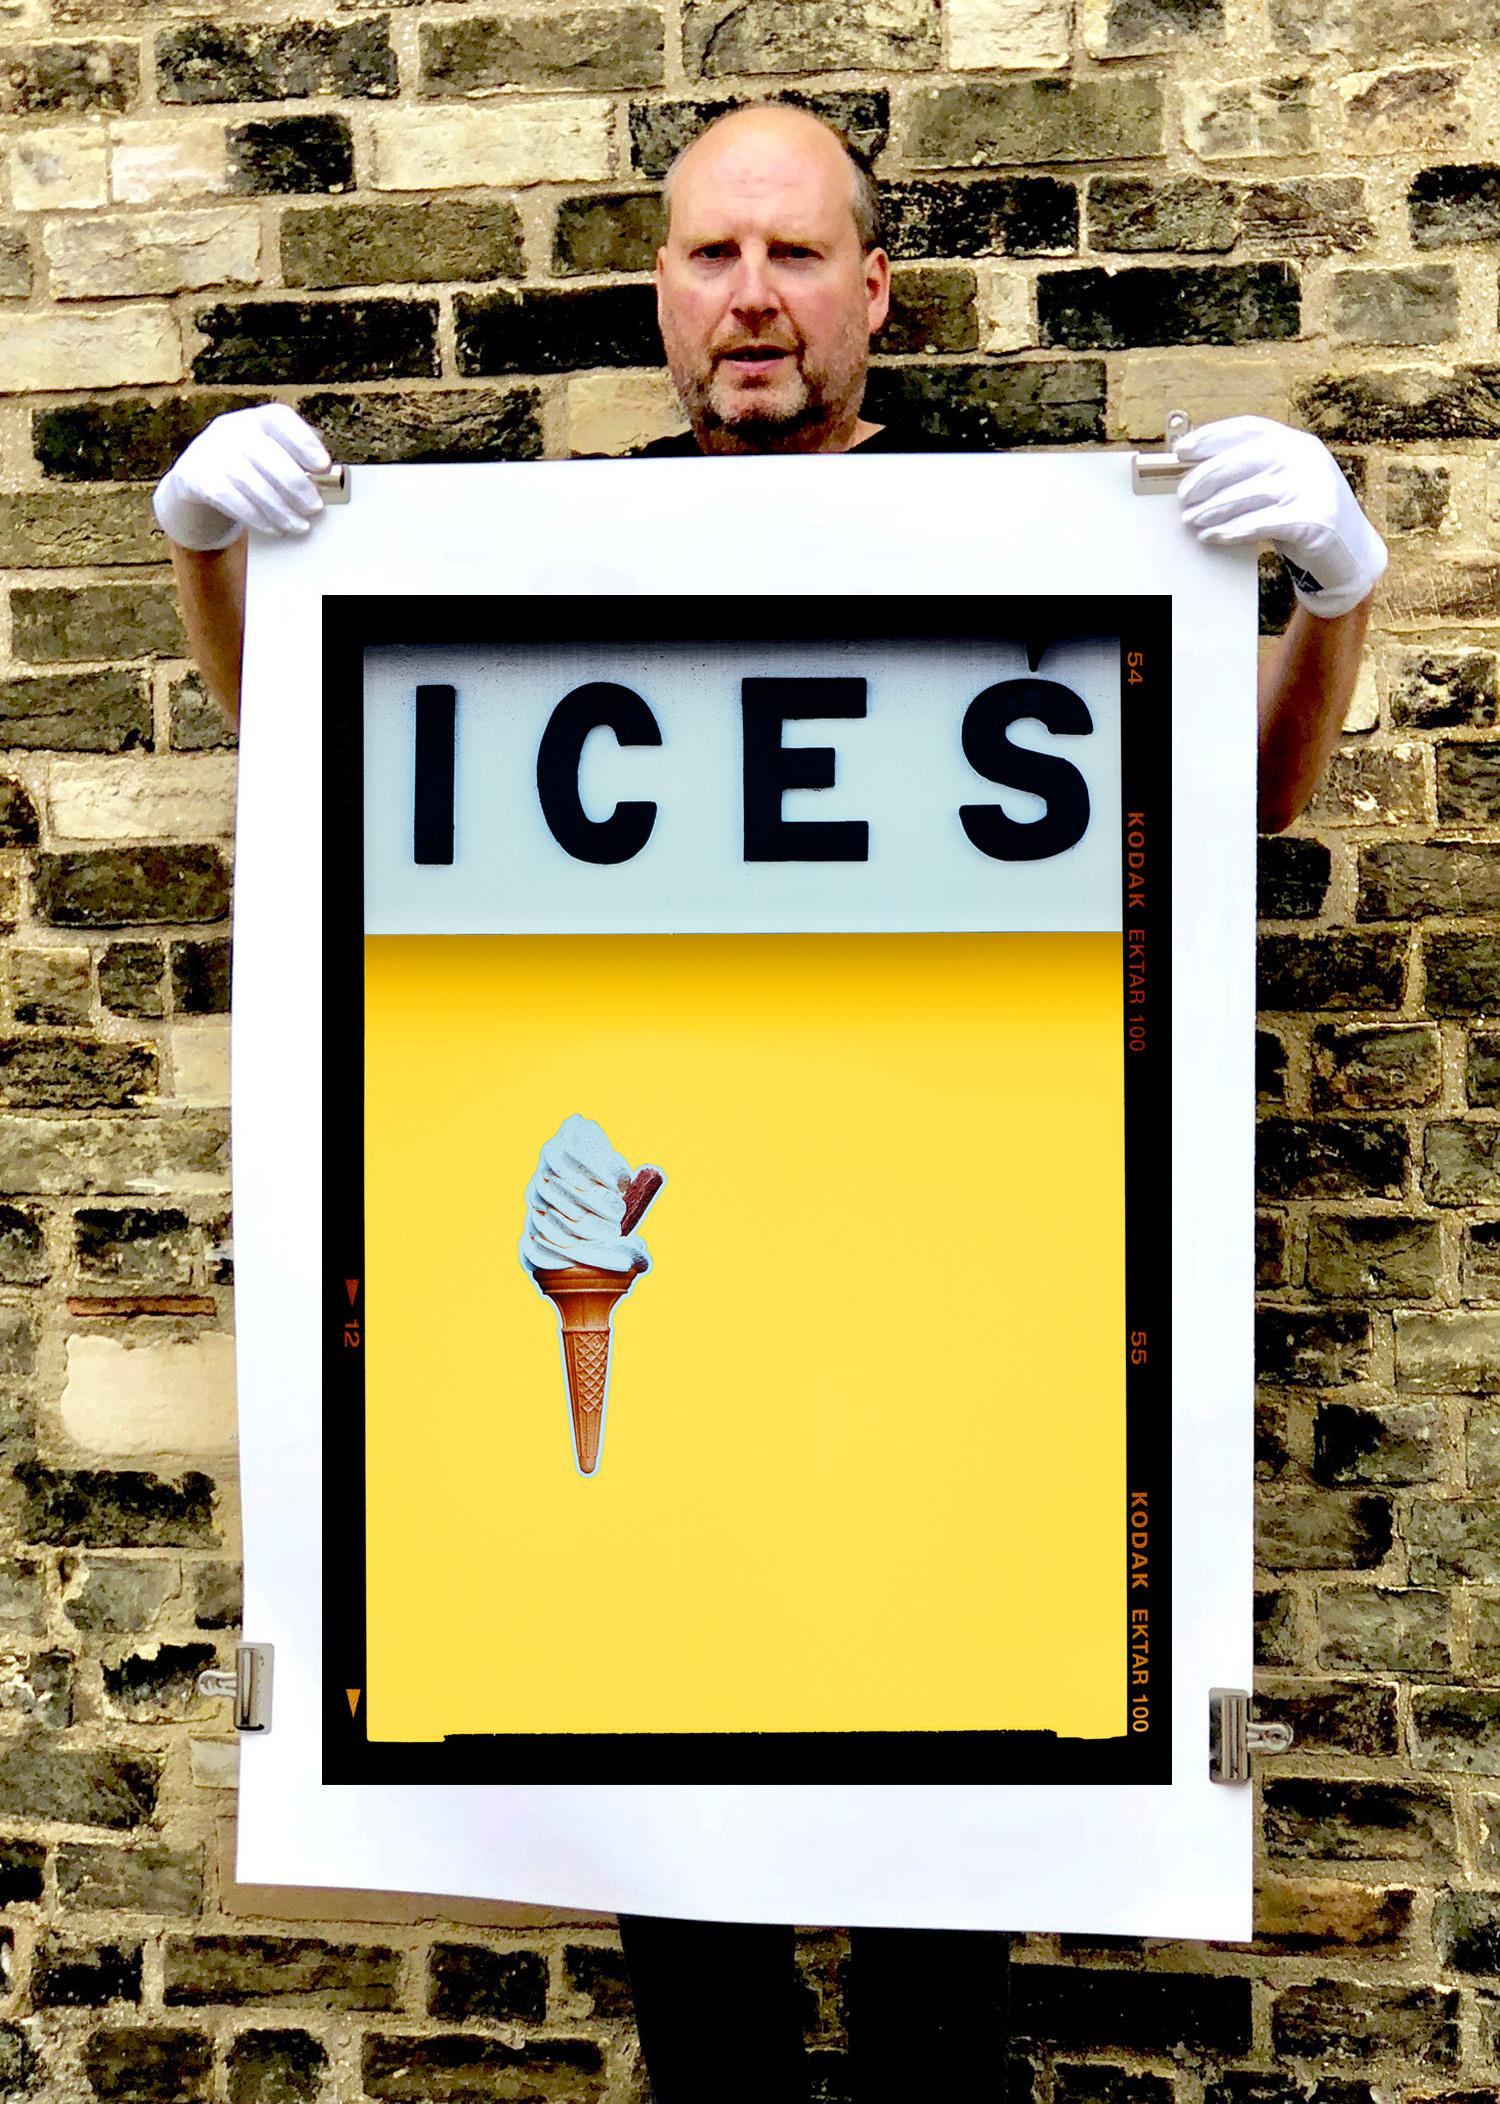 Ices (Sherbet), Bexhill-on-Sea - British pop art color photography - Photograph by Richard Heeps